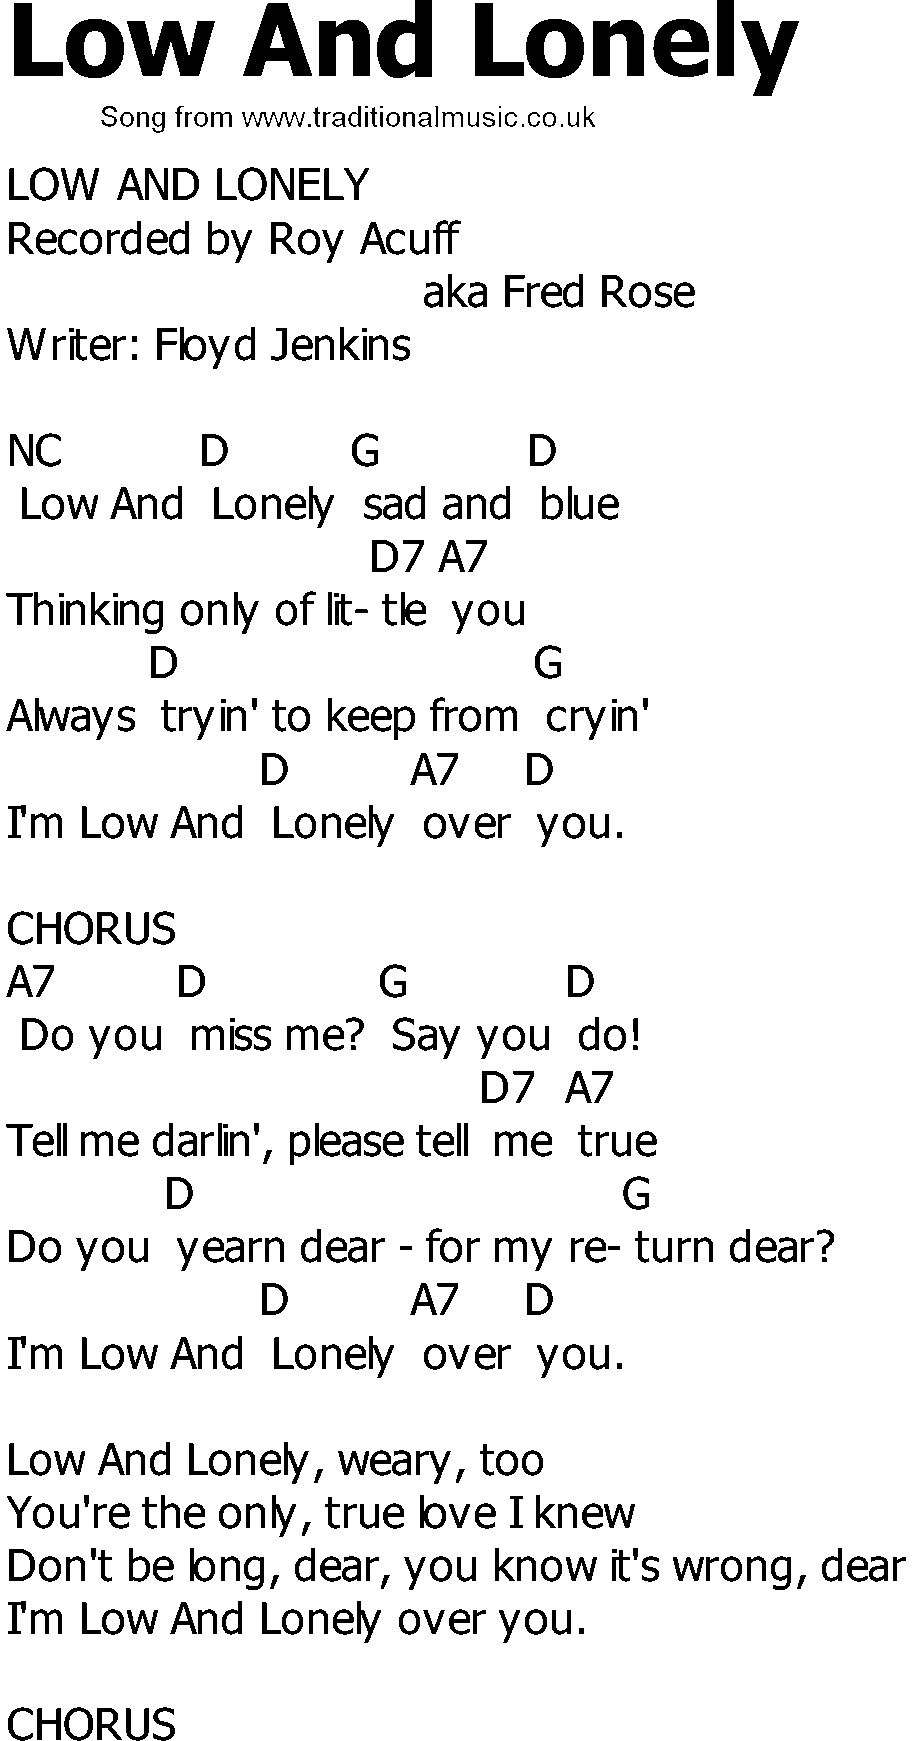 Old Country song lyrics with chords - Low And Lonely